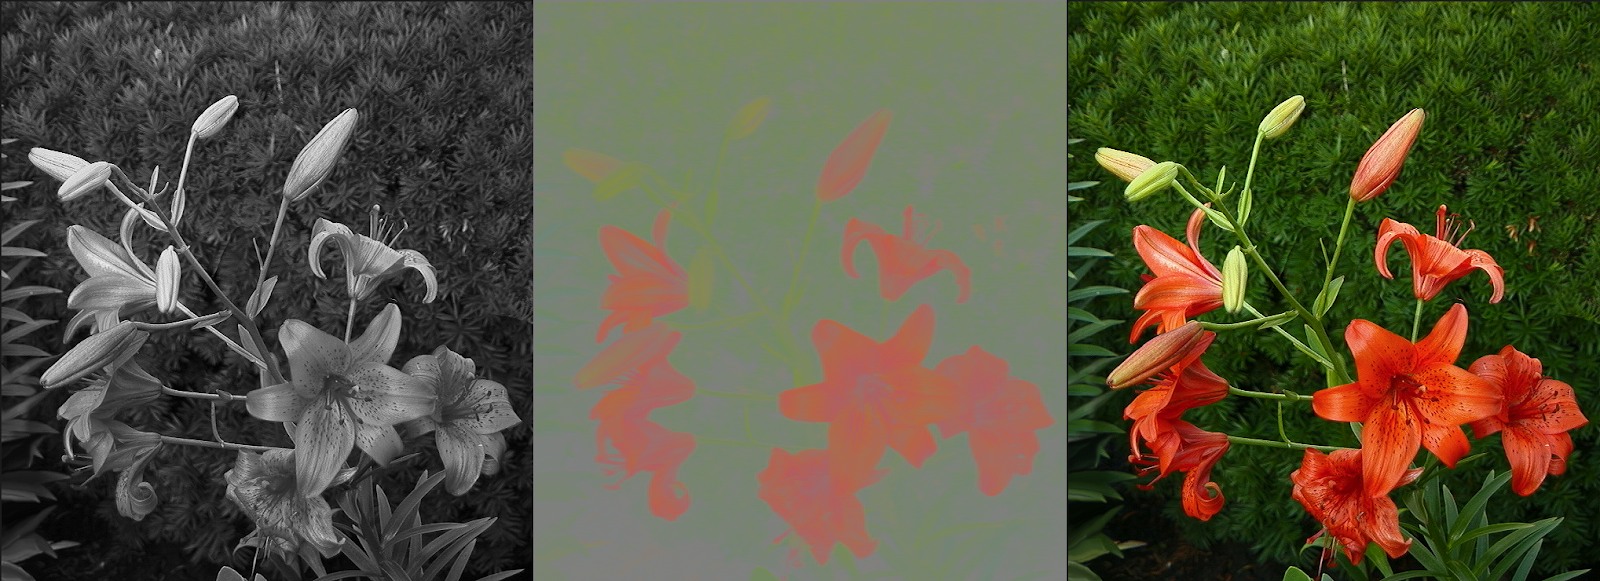 Image of flowers displayed in three ways - as Luma only, Chroma only and both Luma and Chroma together (regular image)